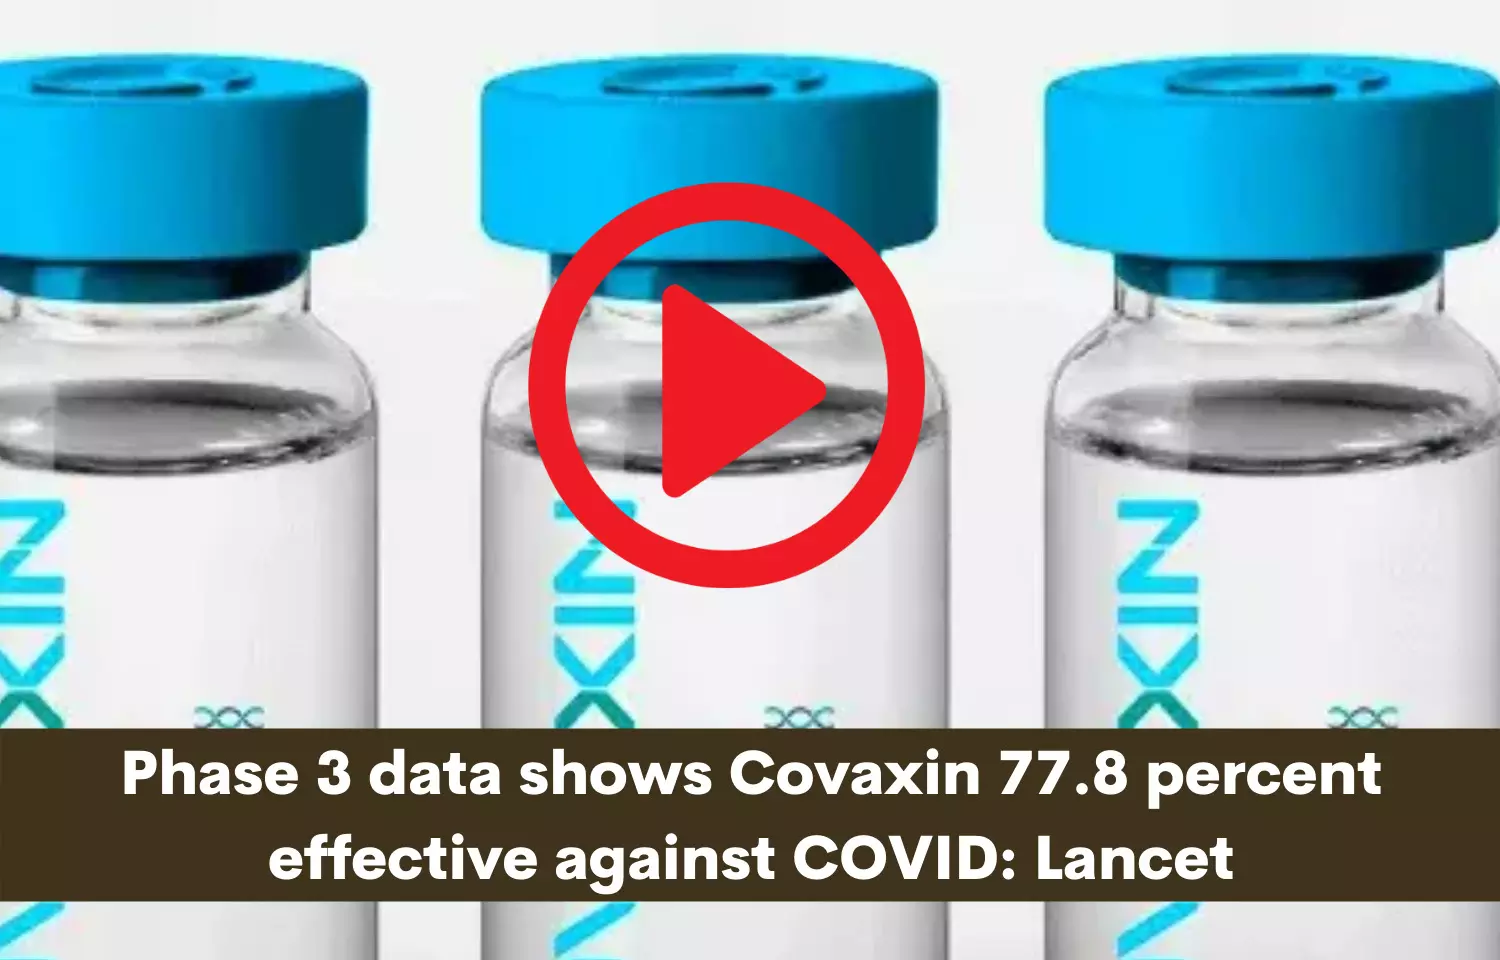 Phase 3 data shows Covaxin 77.8 percent effective against COVID: Lancet